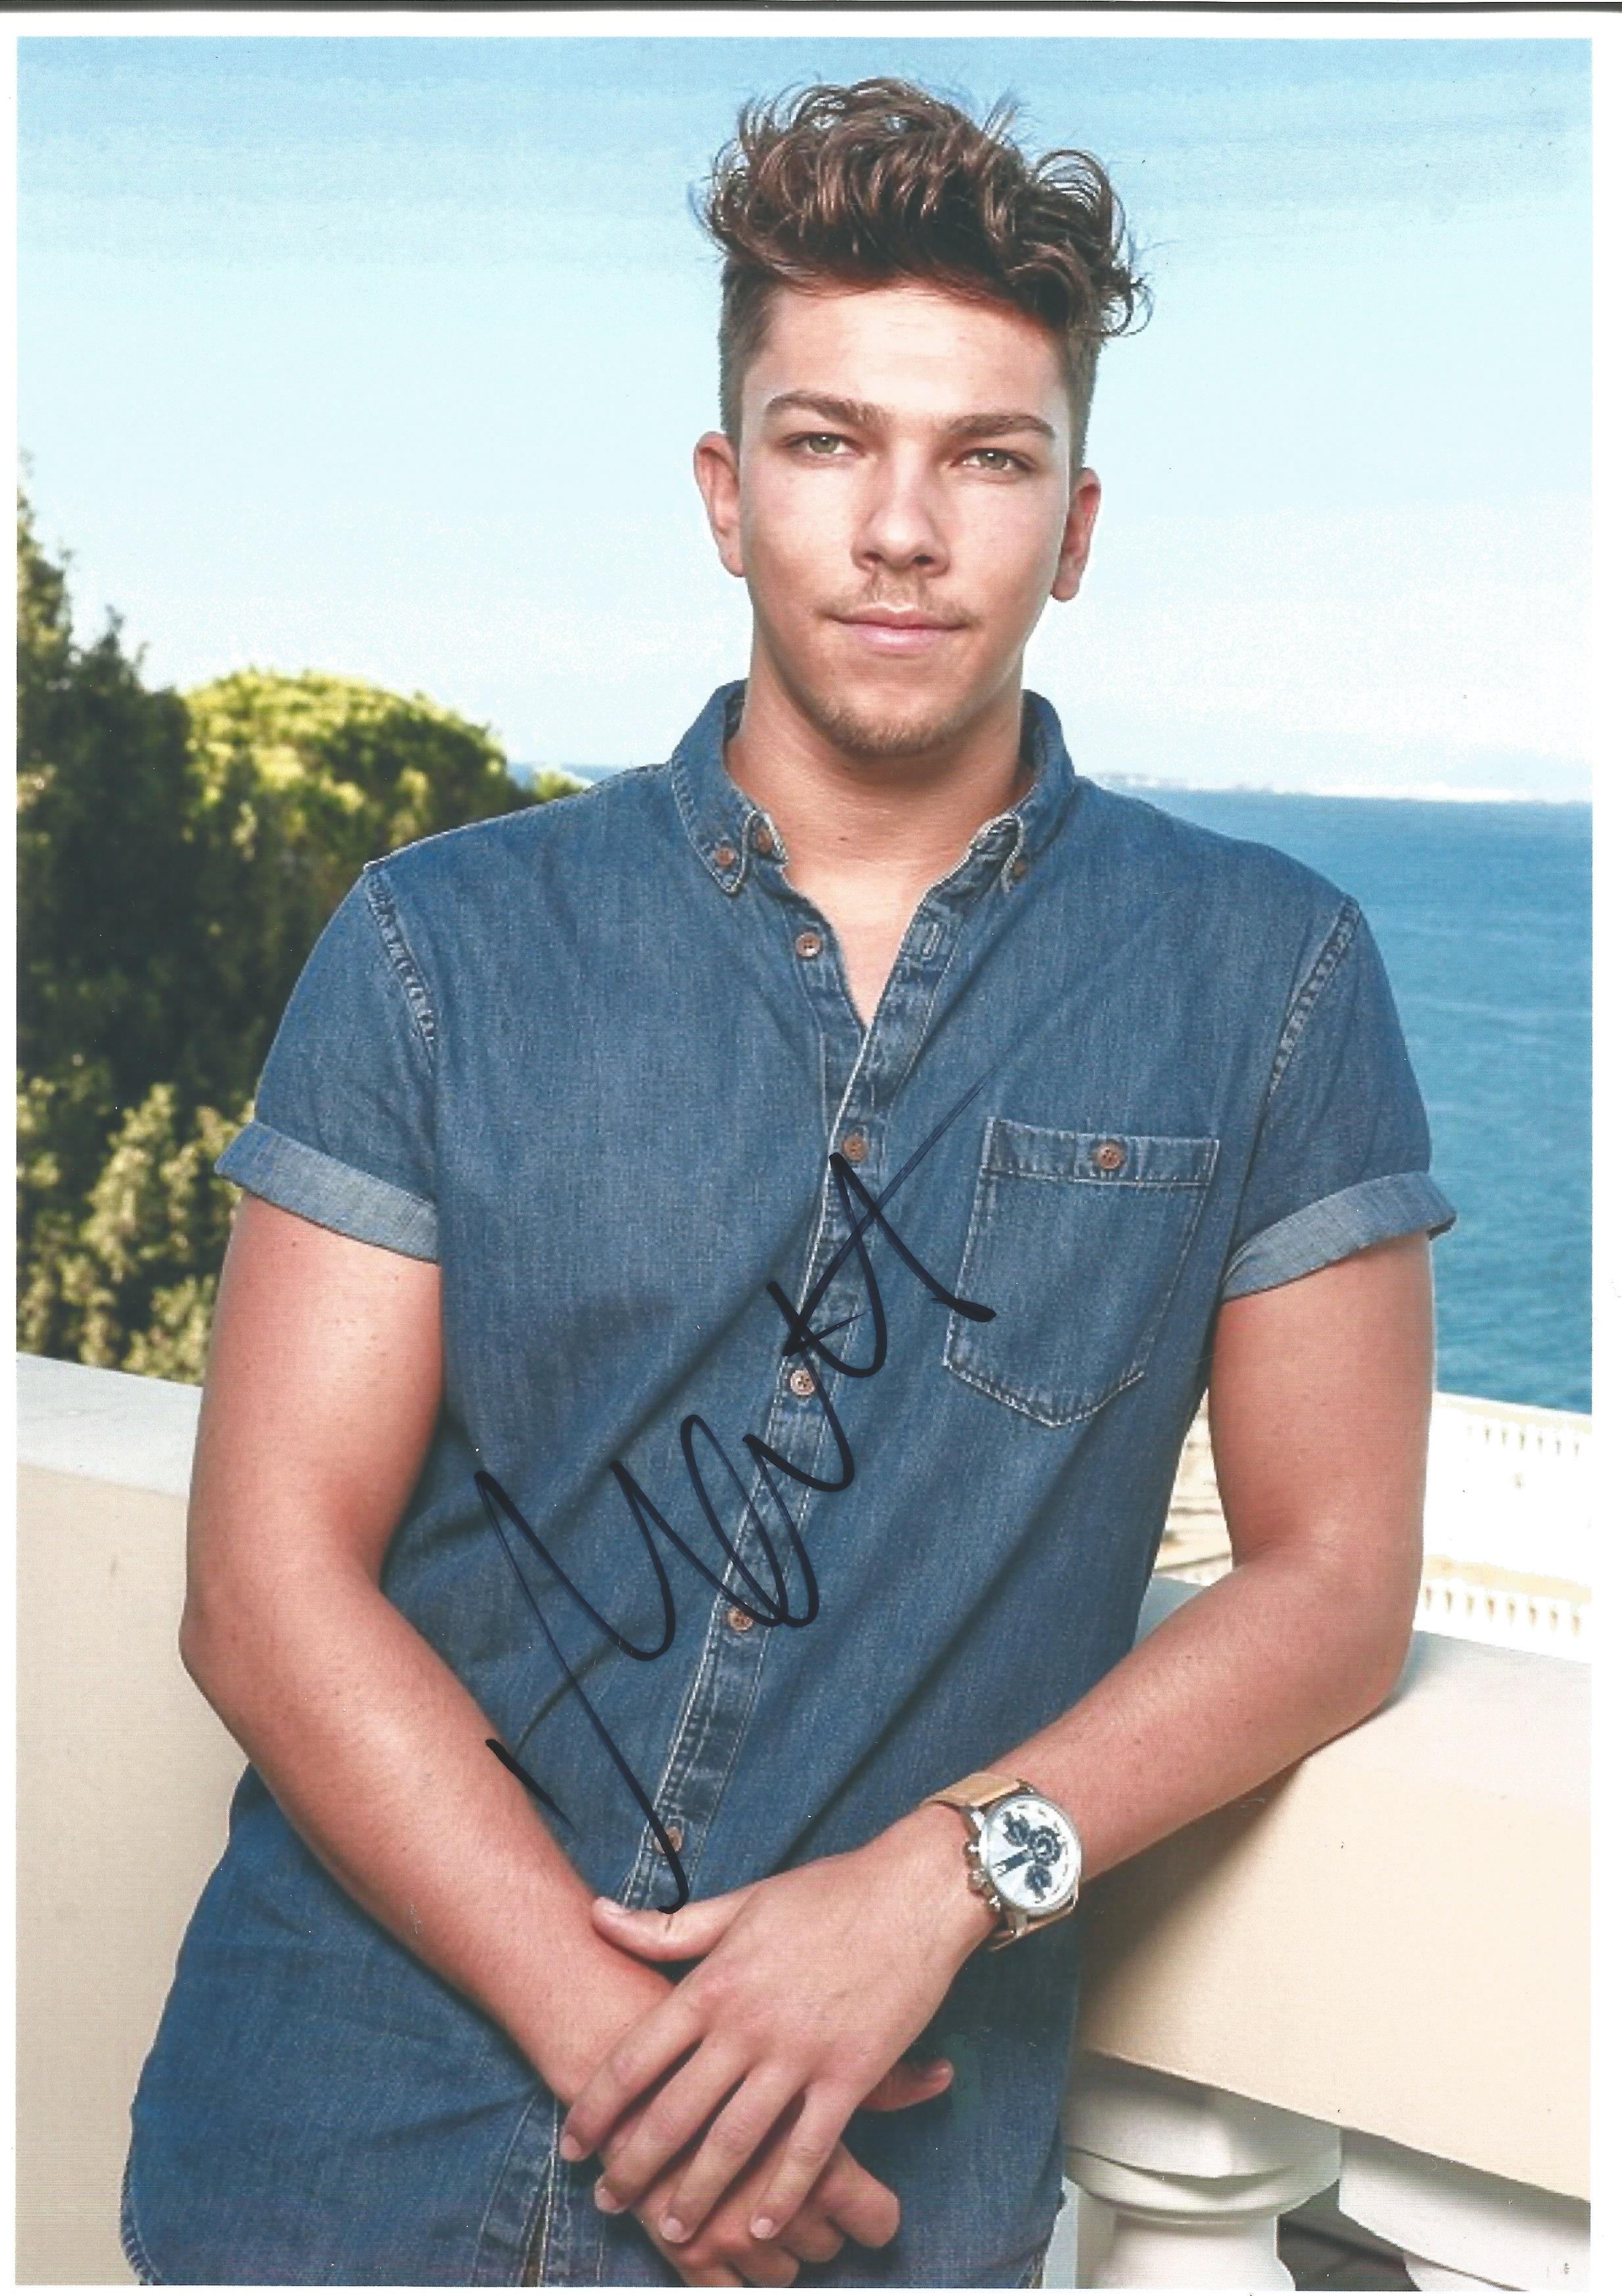 Matt Terry X Factor winner Signed 8x10 colour photograph. Good Condition. All signed pieces come